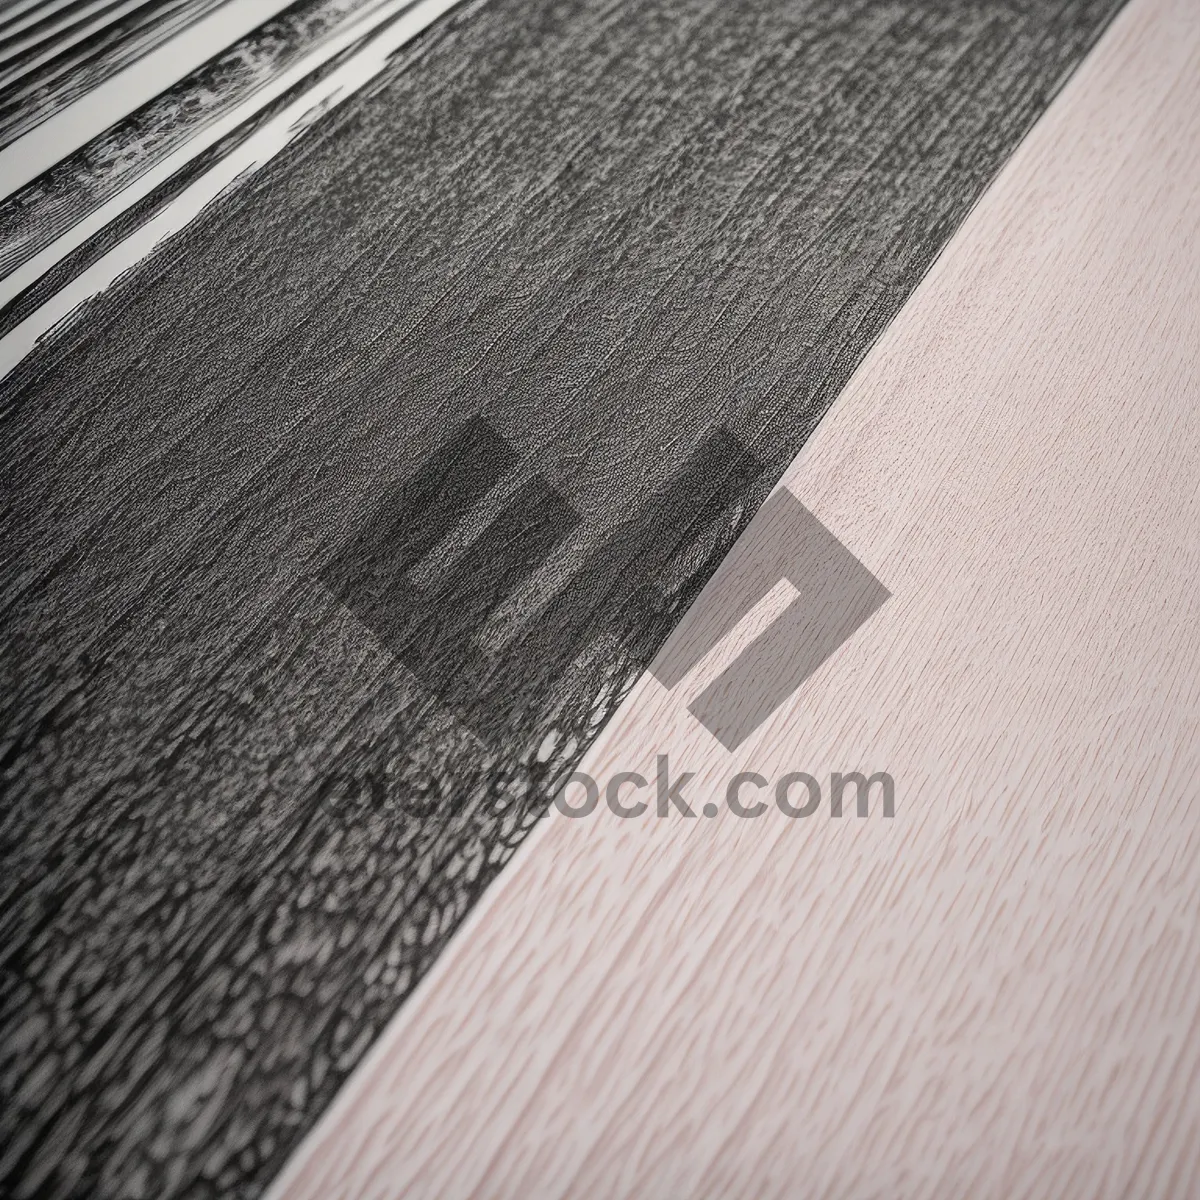 Picture of Dune Textured Panel on Surface: Parquet Wall Deck